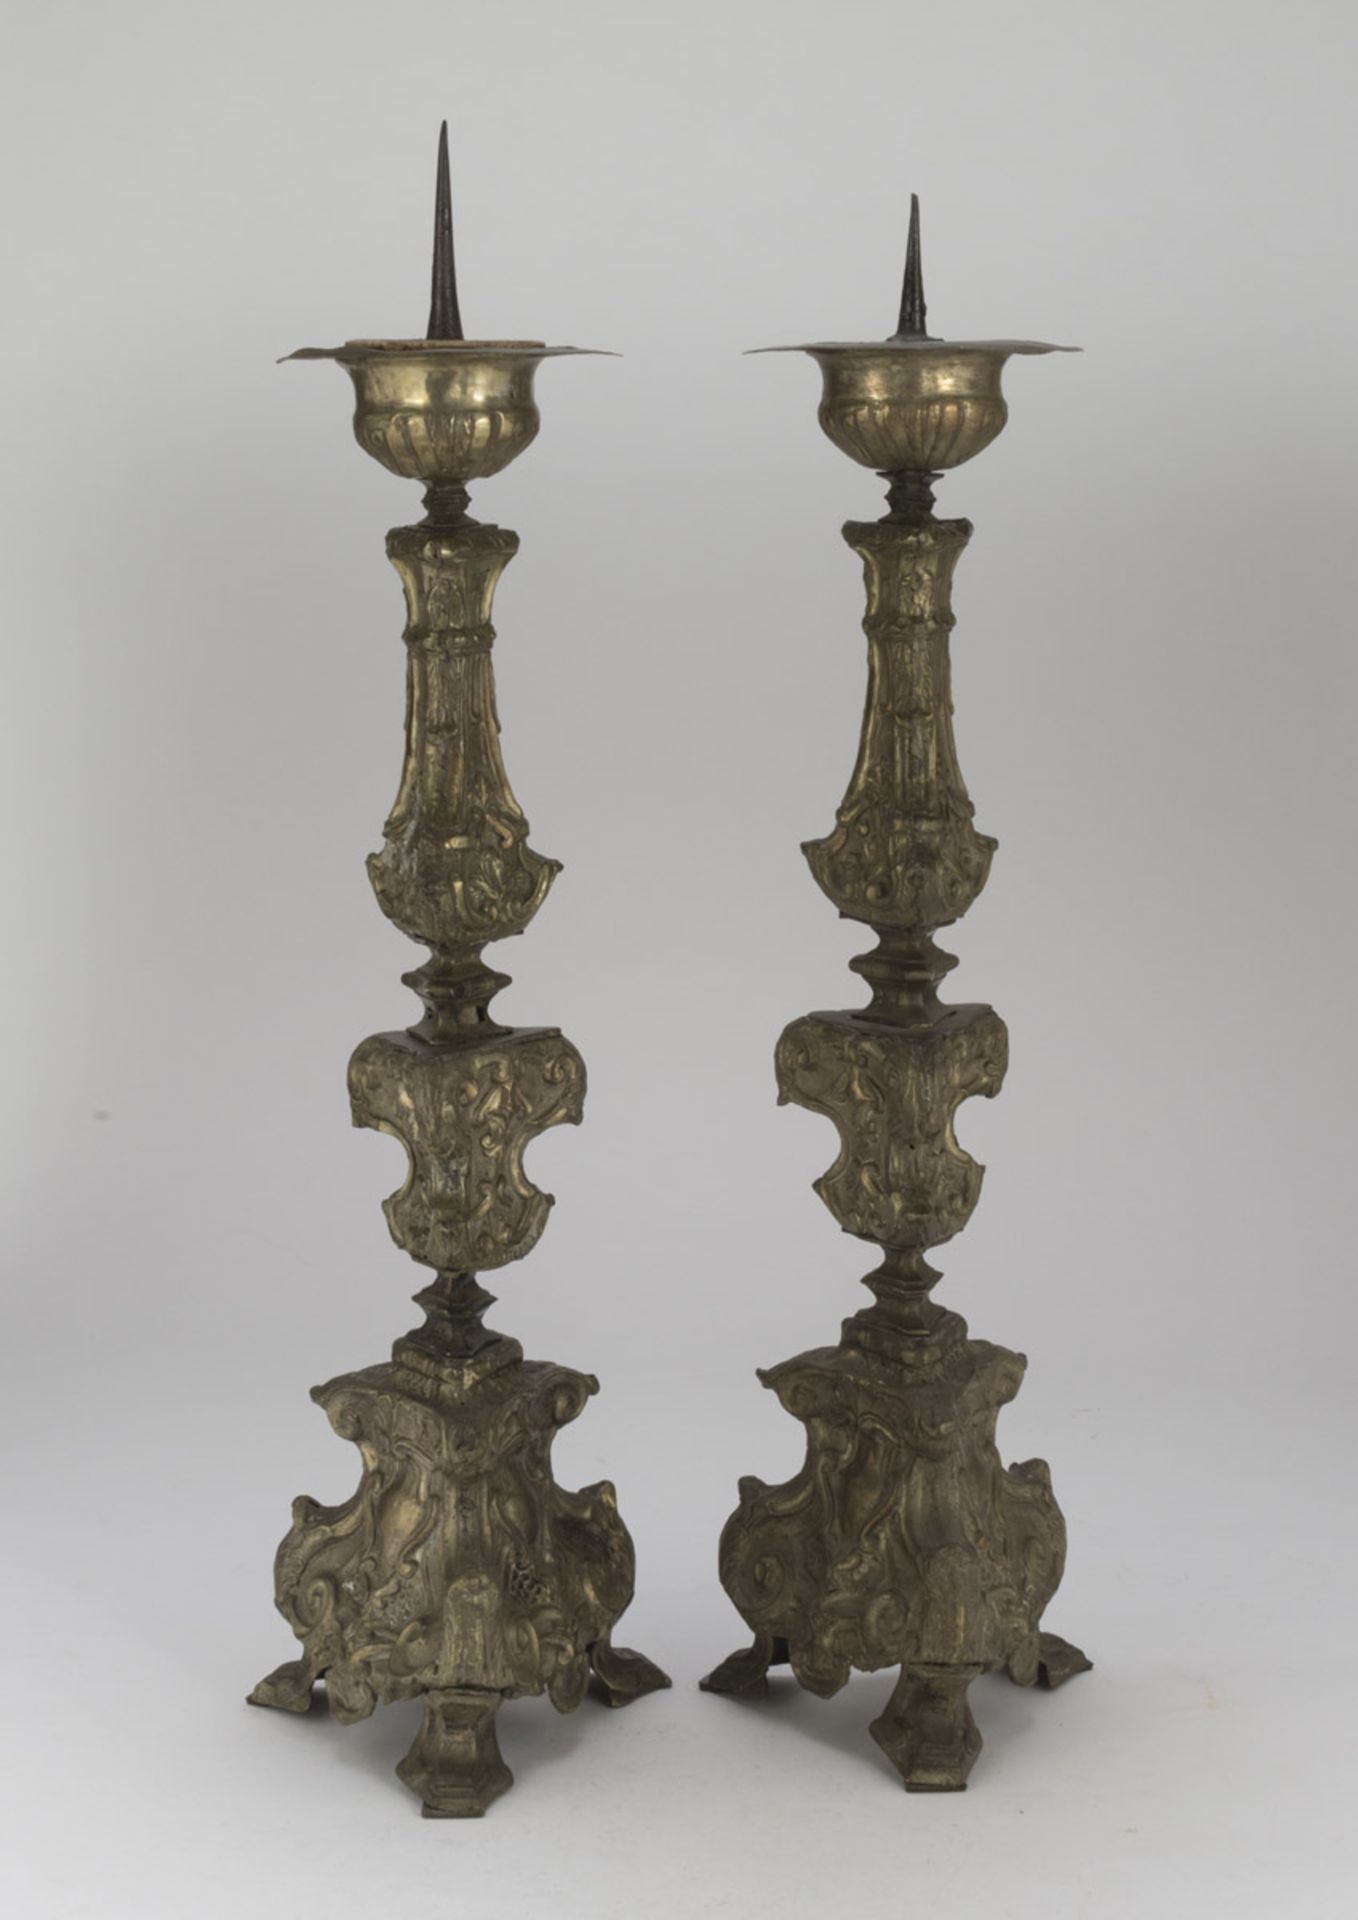 A PAIR OF SILVER-PLATED CANDLESTICKS, ROME SECOLO shaft embossed with spirals and leaves. Triangular